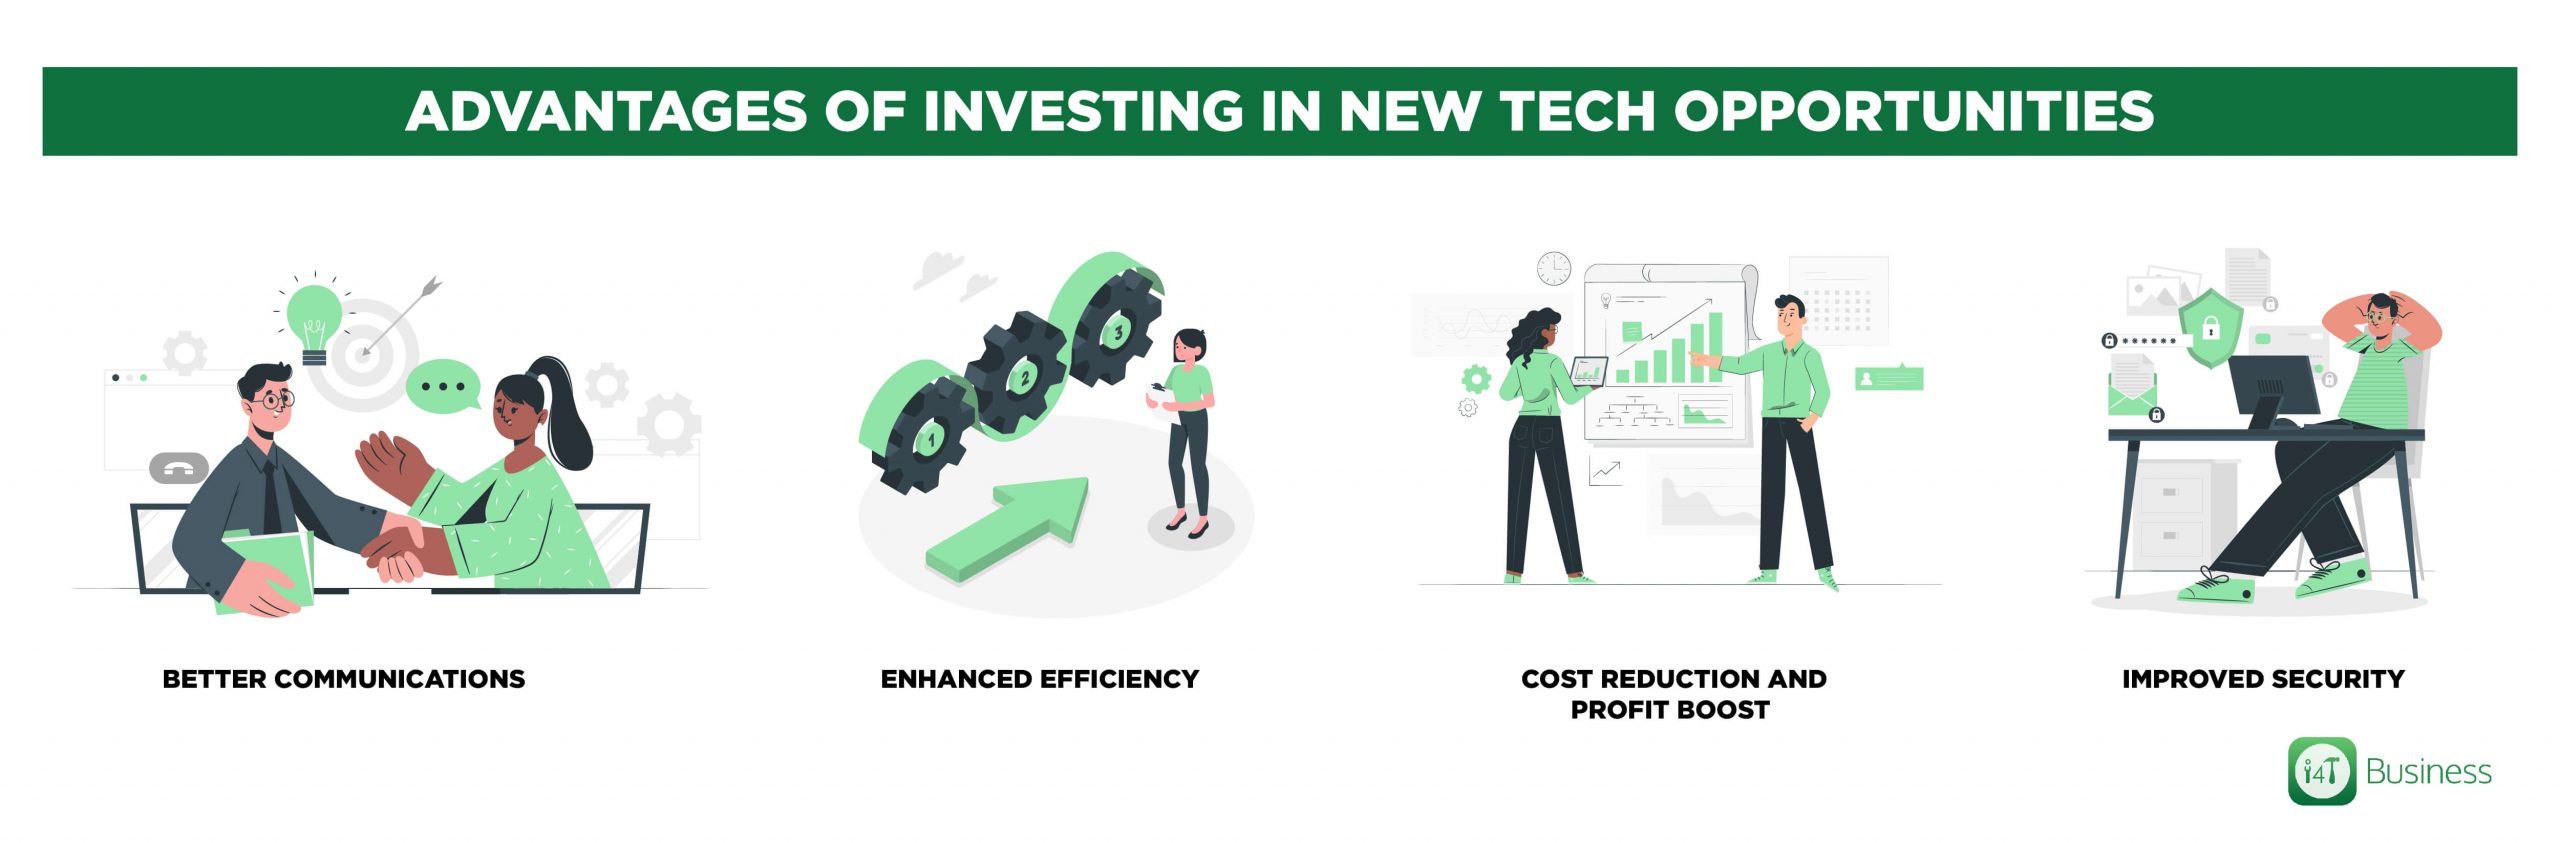 Advantages of investing in new tech opportunities - i4T Global